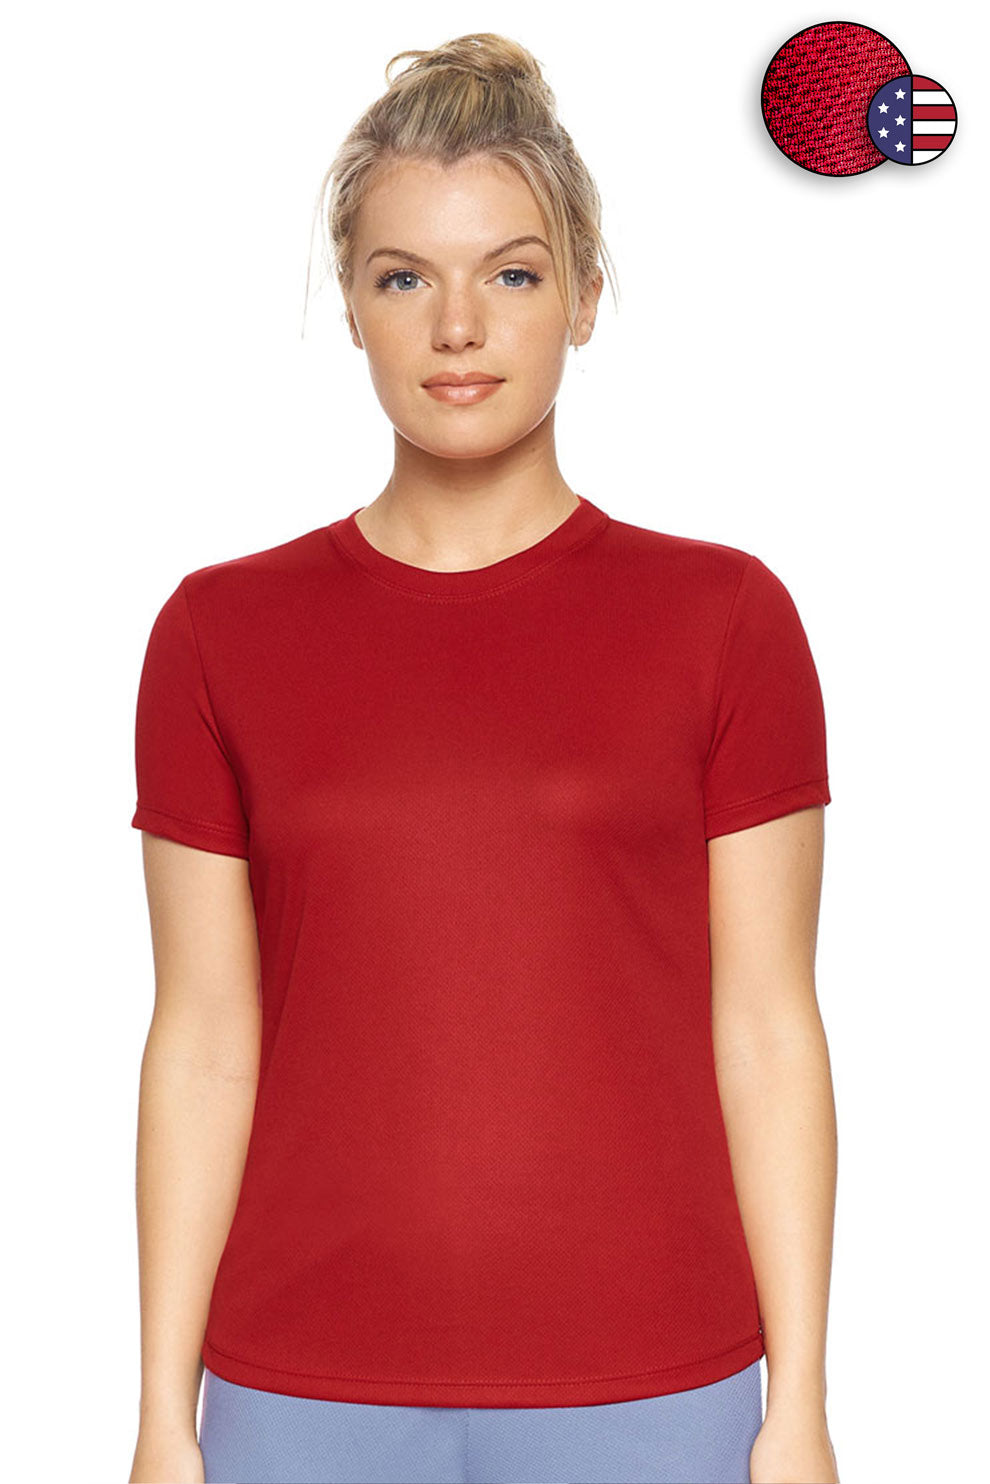 Expert Brand Wholesale Women's Oxymesh Crewneck Performance Tee Made in USA AJ201 Red#red